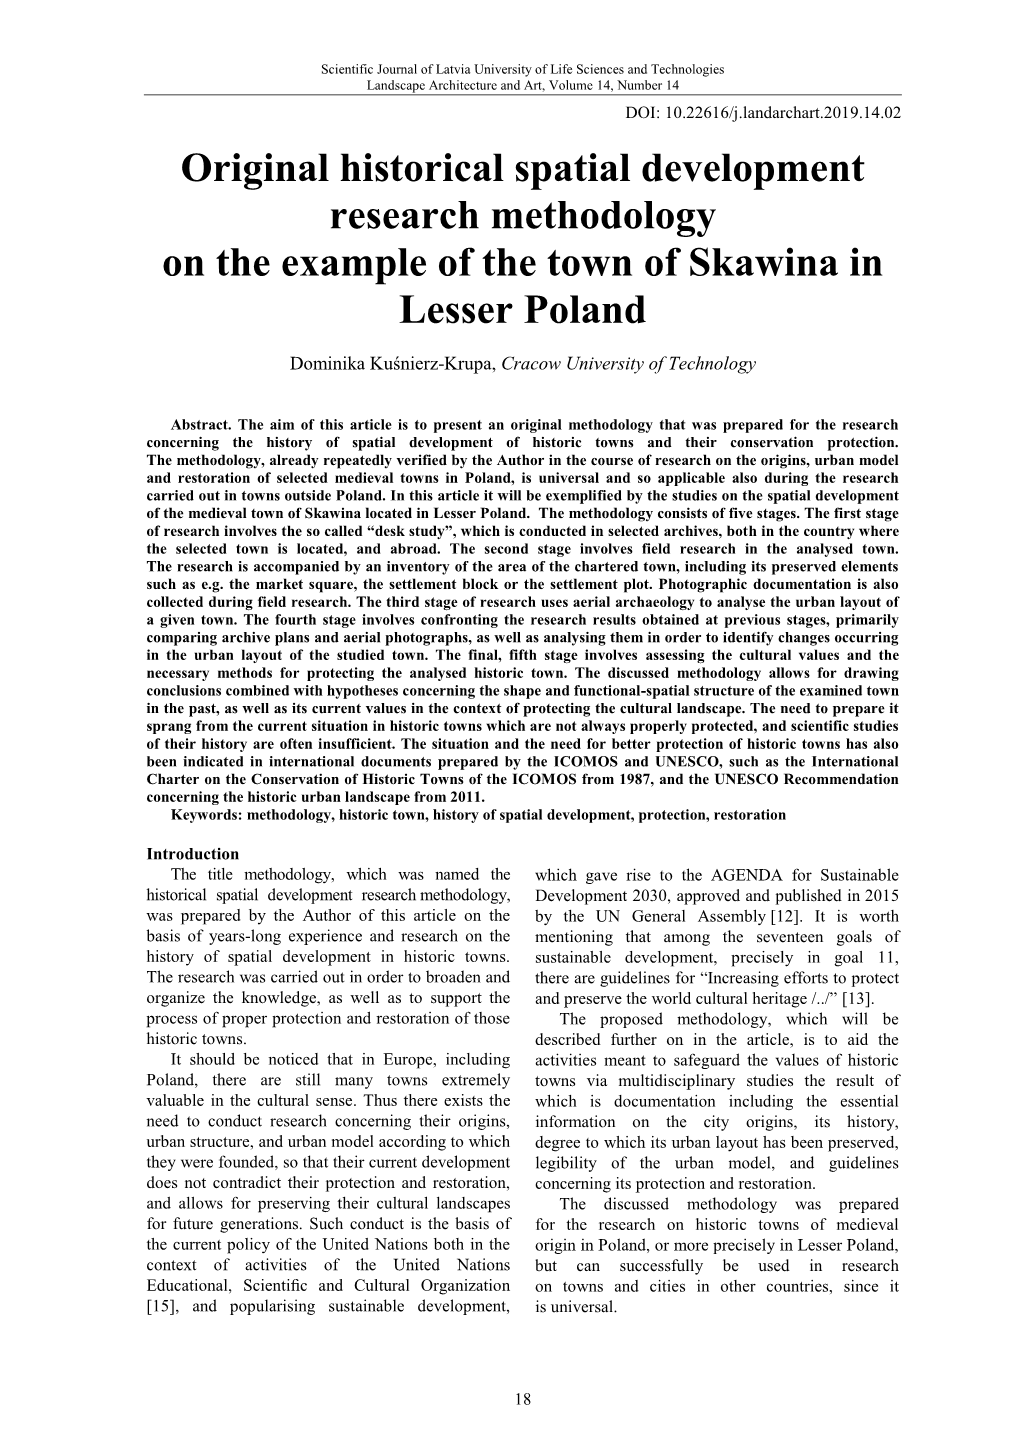 Original Historical Spatial Development Research Methodology on the Example of the Town of Skawina in Lesser Poland